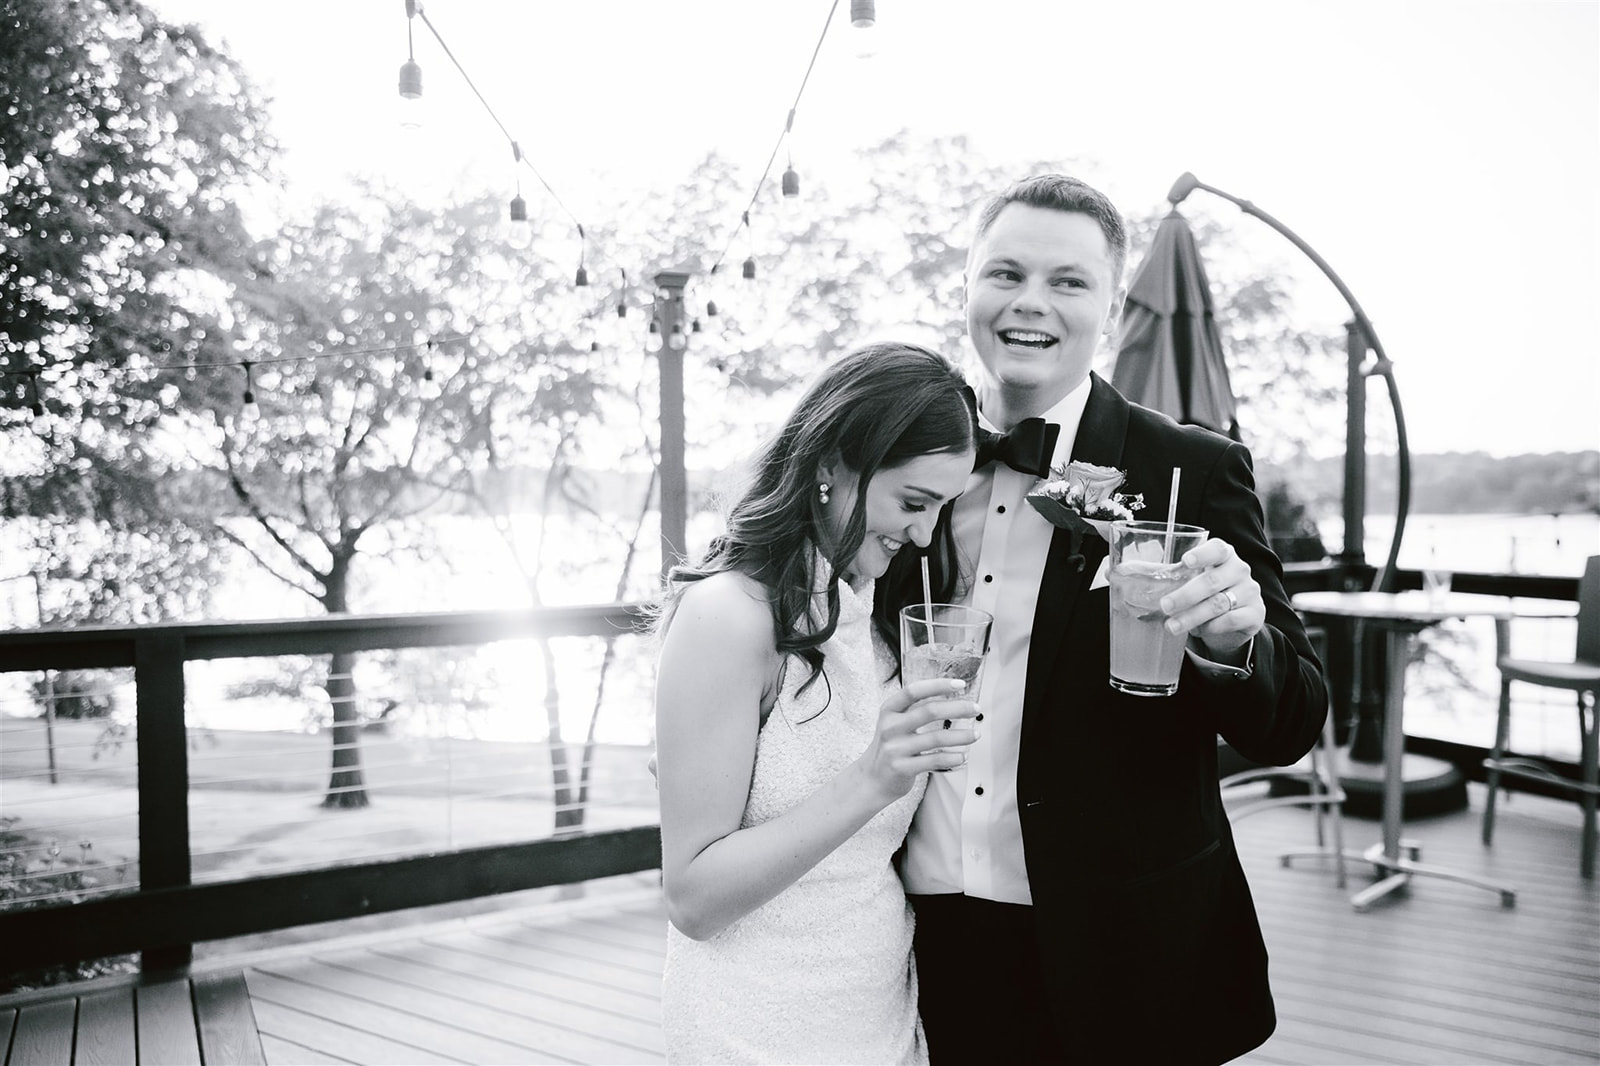 A captivating moment captured as the couple raises their glasses in a heartfelt toast against the backdrop of a stunning